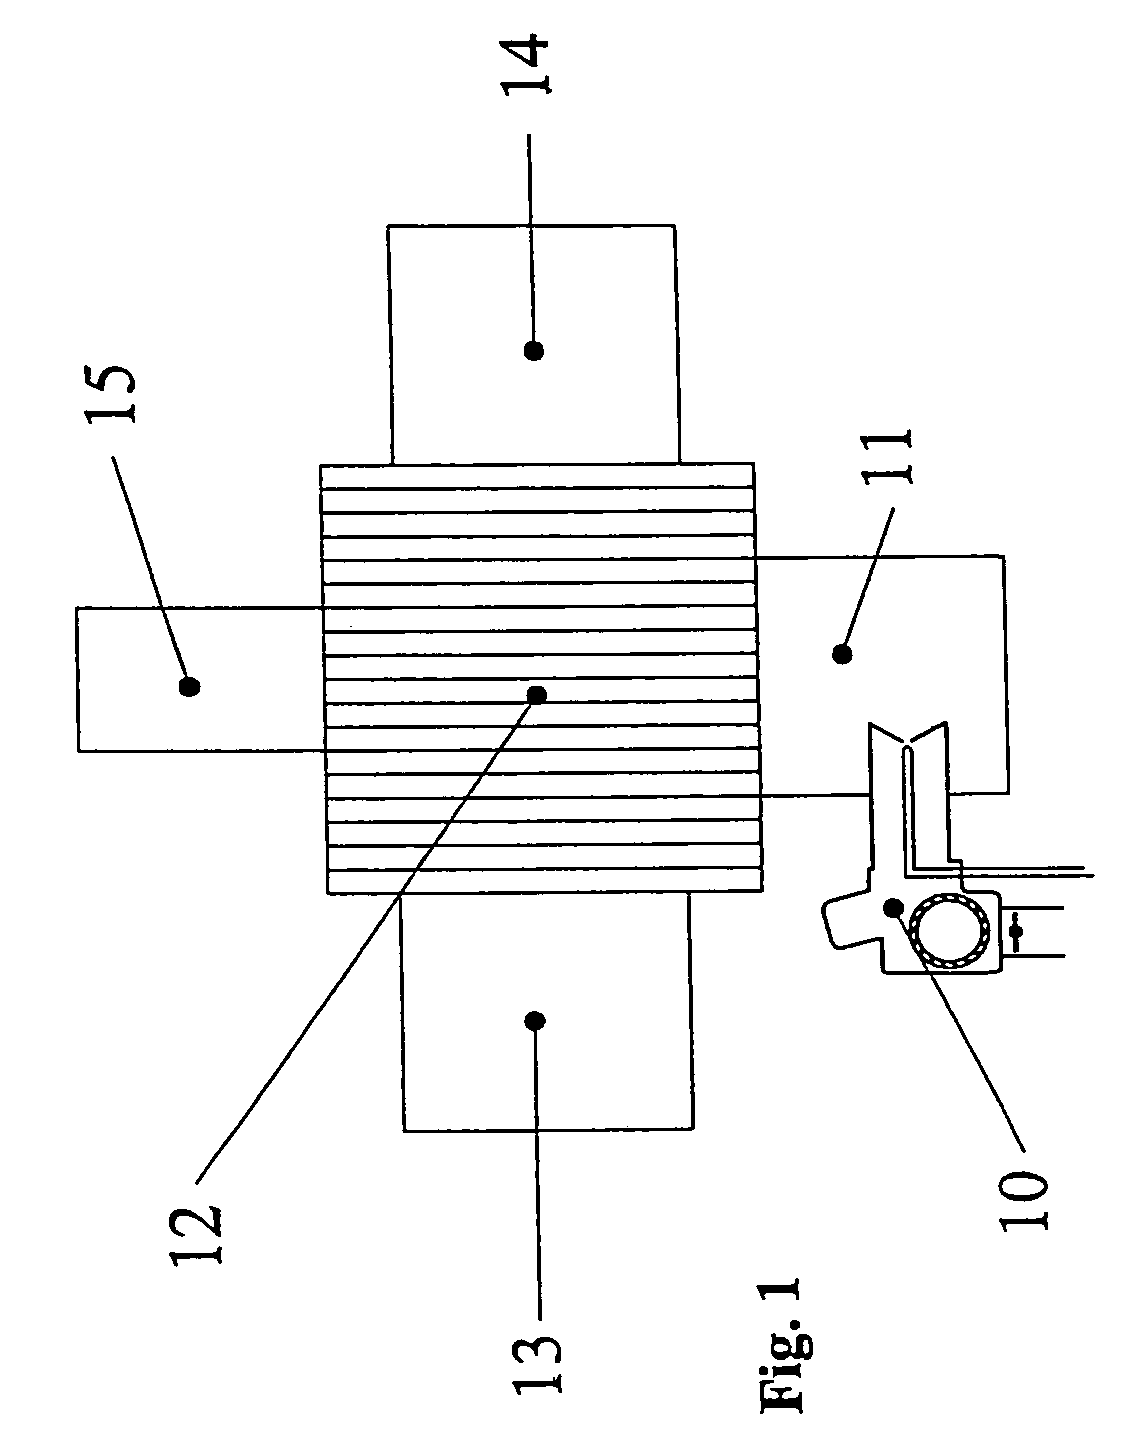 Apparatus and method for fuel flow rate, fuel temperature, fuel droplet size, and burner firing rate modulation